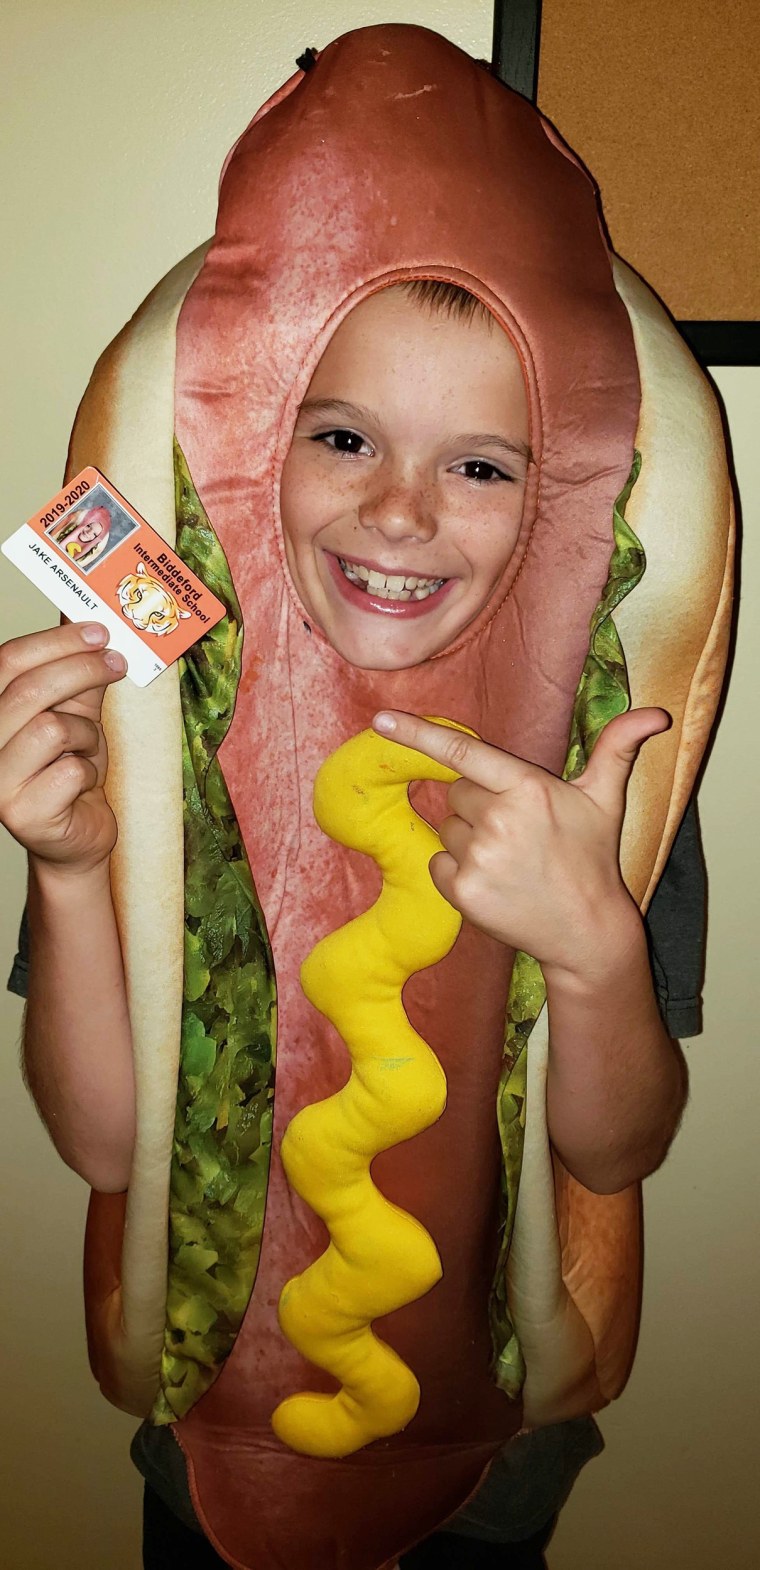 Jake Arsenault went viral after he dressed up as a hot dog for school photo day. 